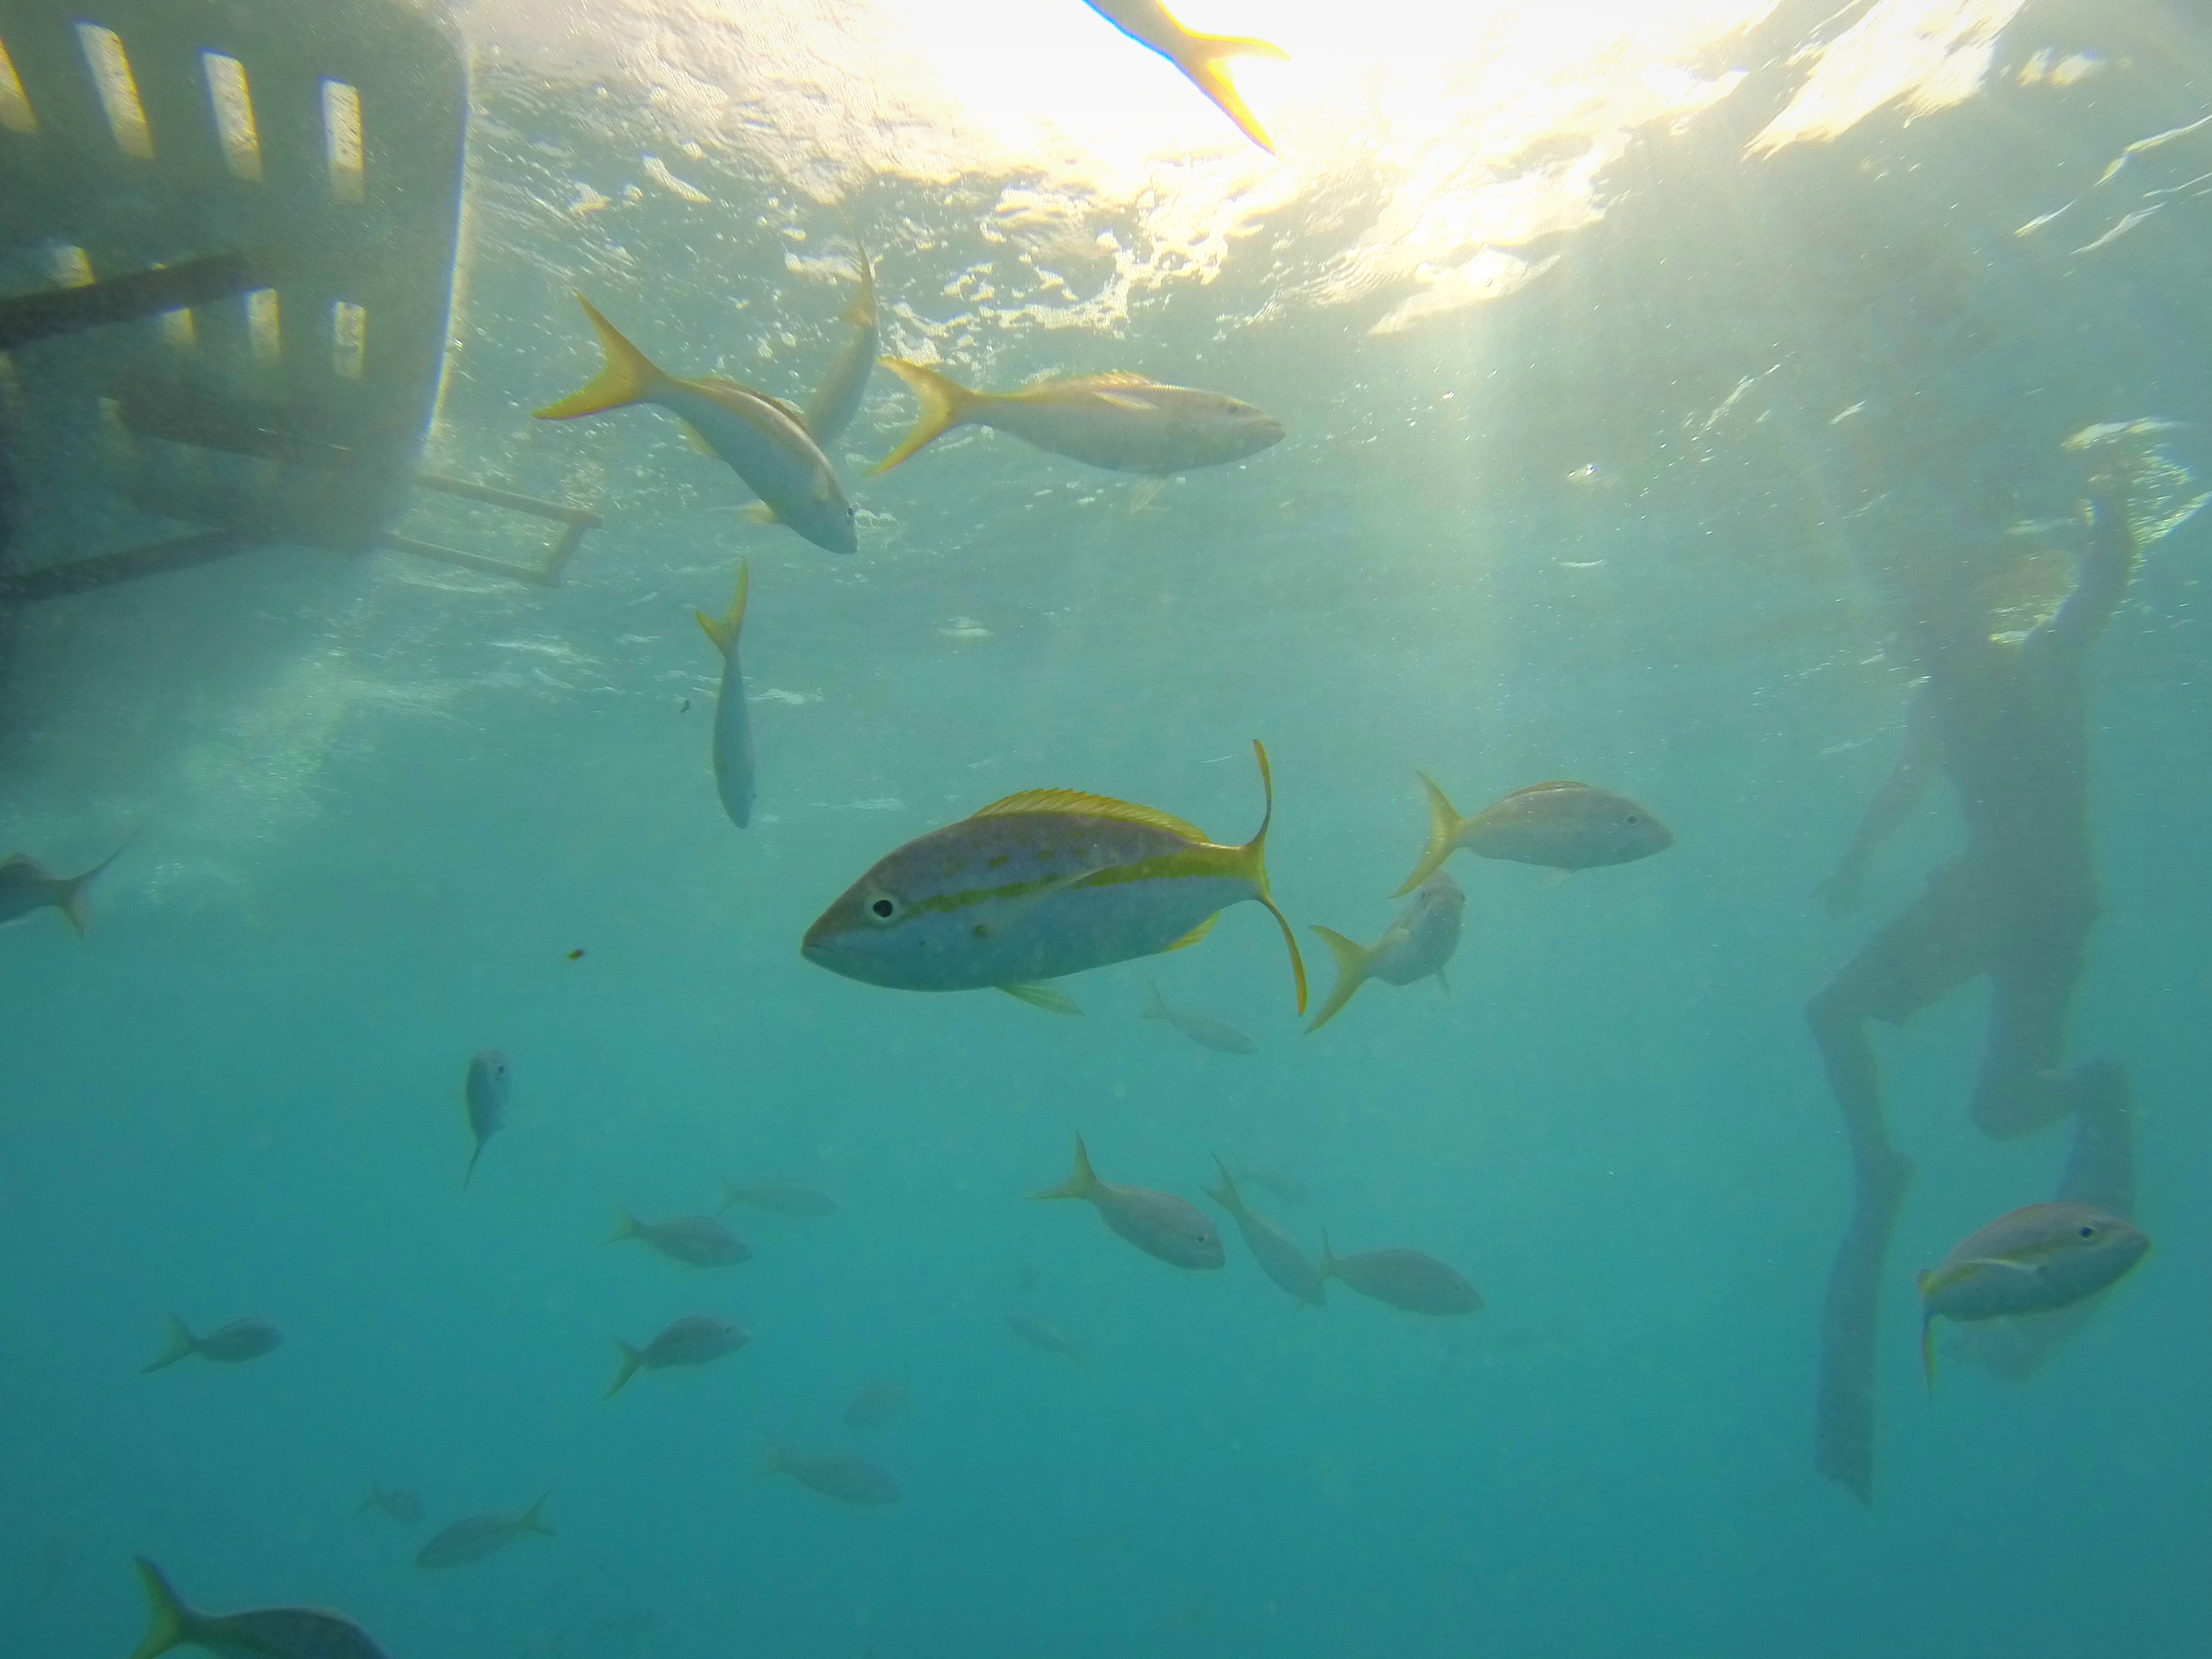 An underwater picture of someone snorkeling with a school of yellowtail snapper in the Florida keys.